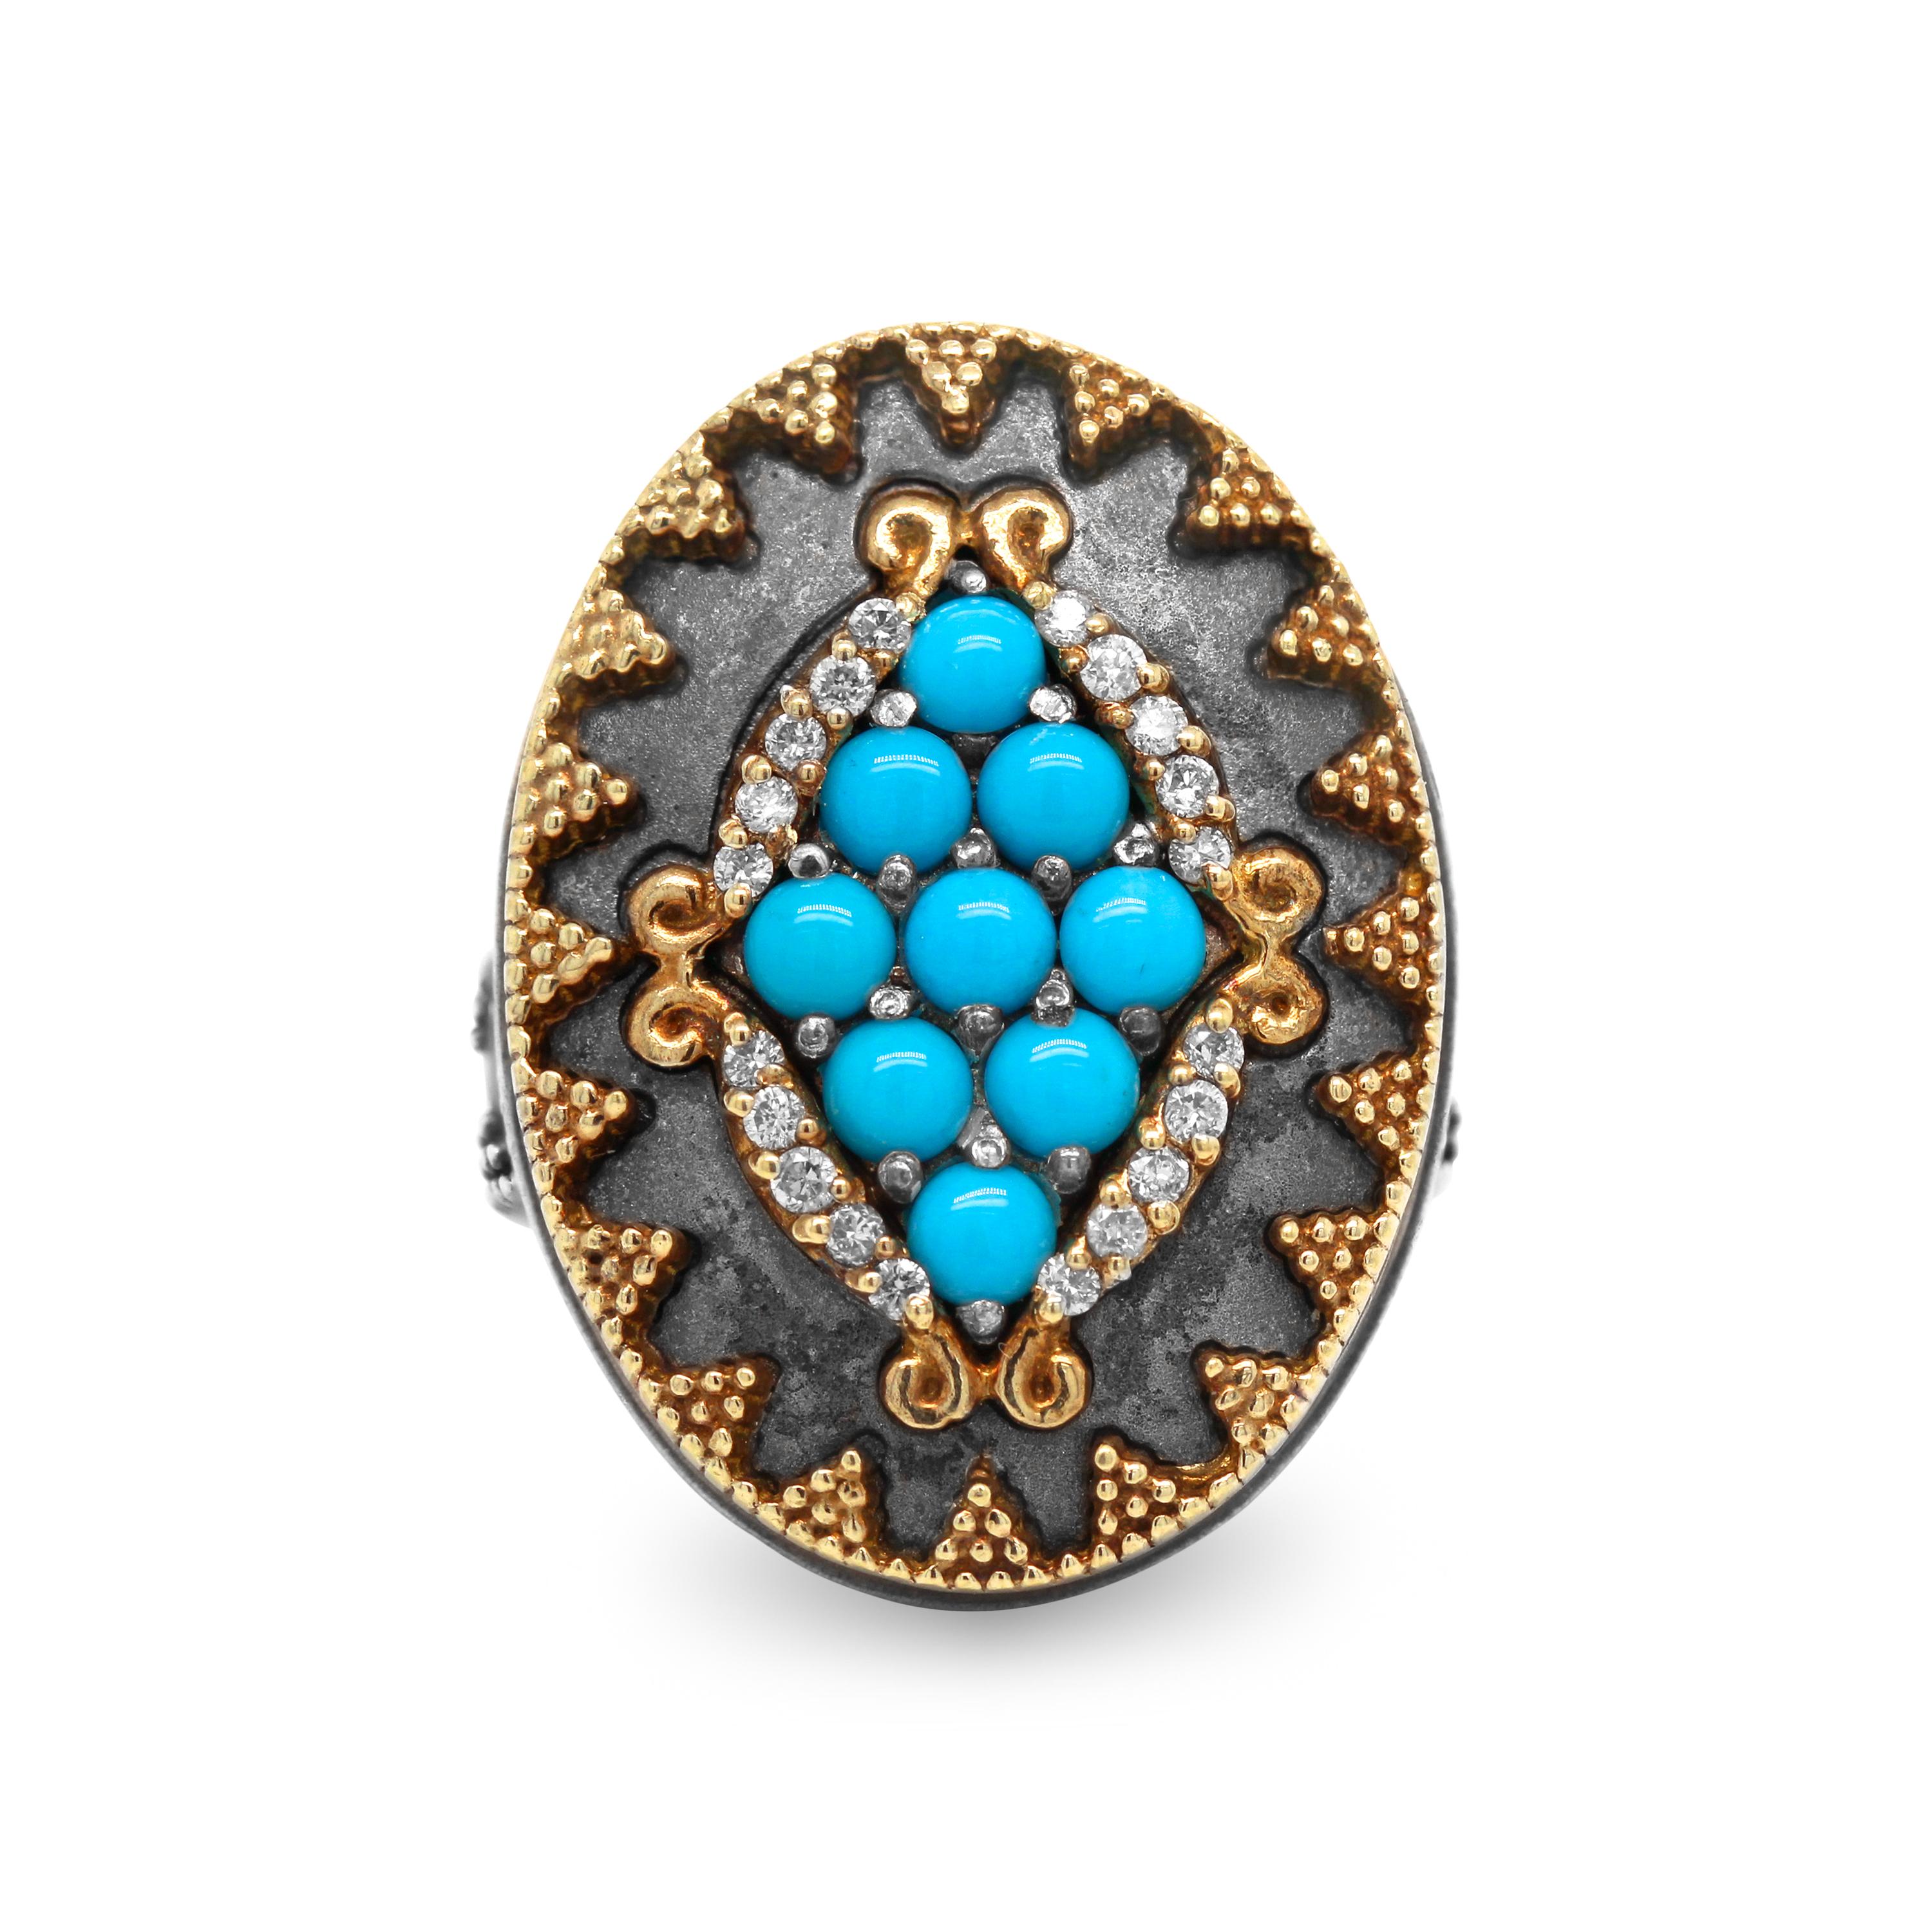 Stambolian Sleeping Beauty Turquoise Diamond Silver 18K Gold Oval Face Ring

This art piece by Stambolian features unique textured design work all throughout. The Aged Silver paired with the 18 Karat gold provides a stunning contrast that goes